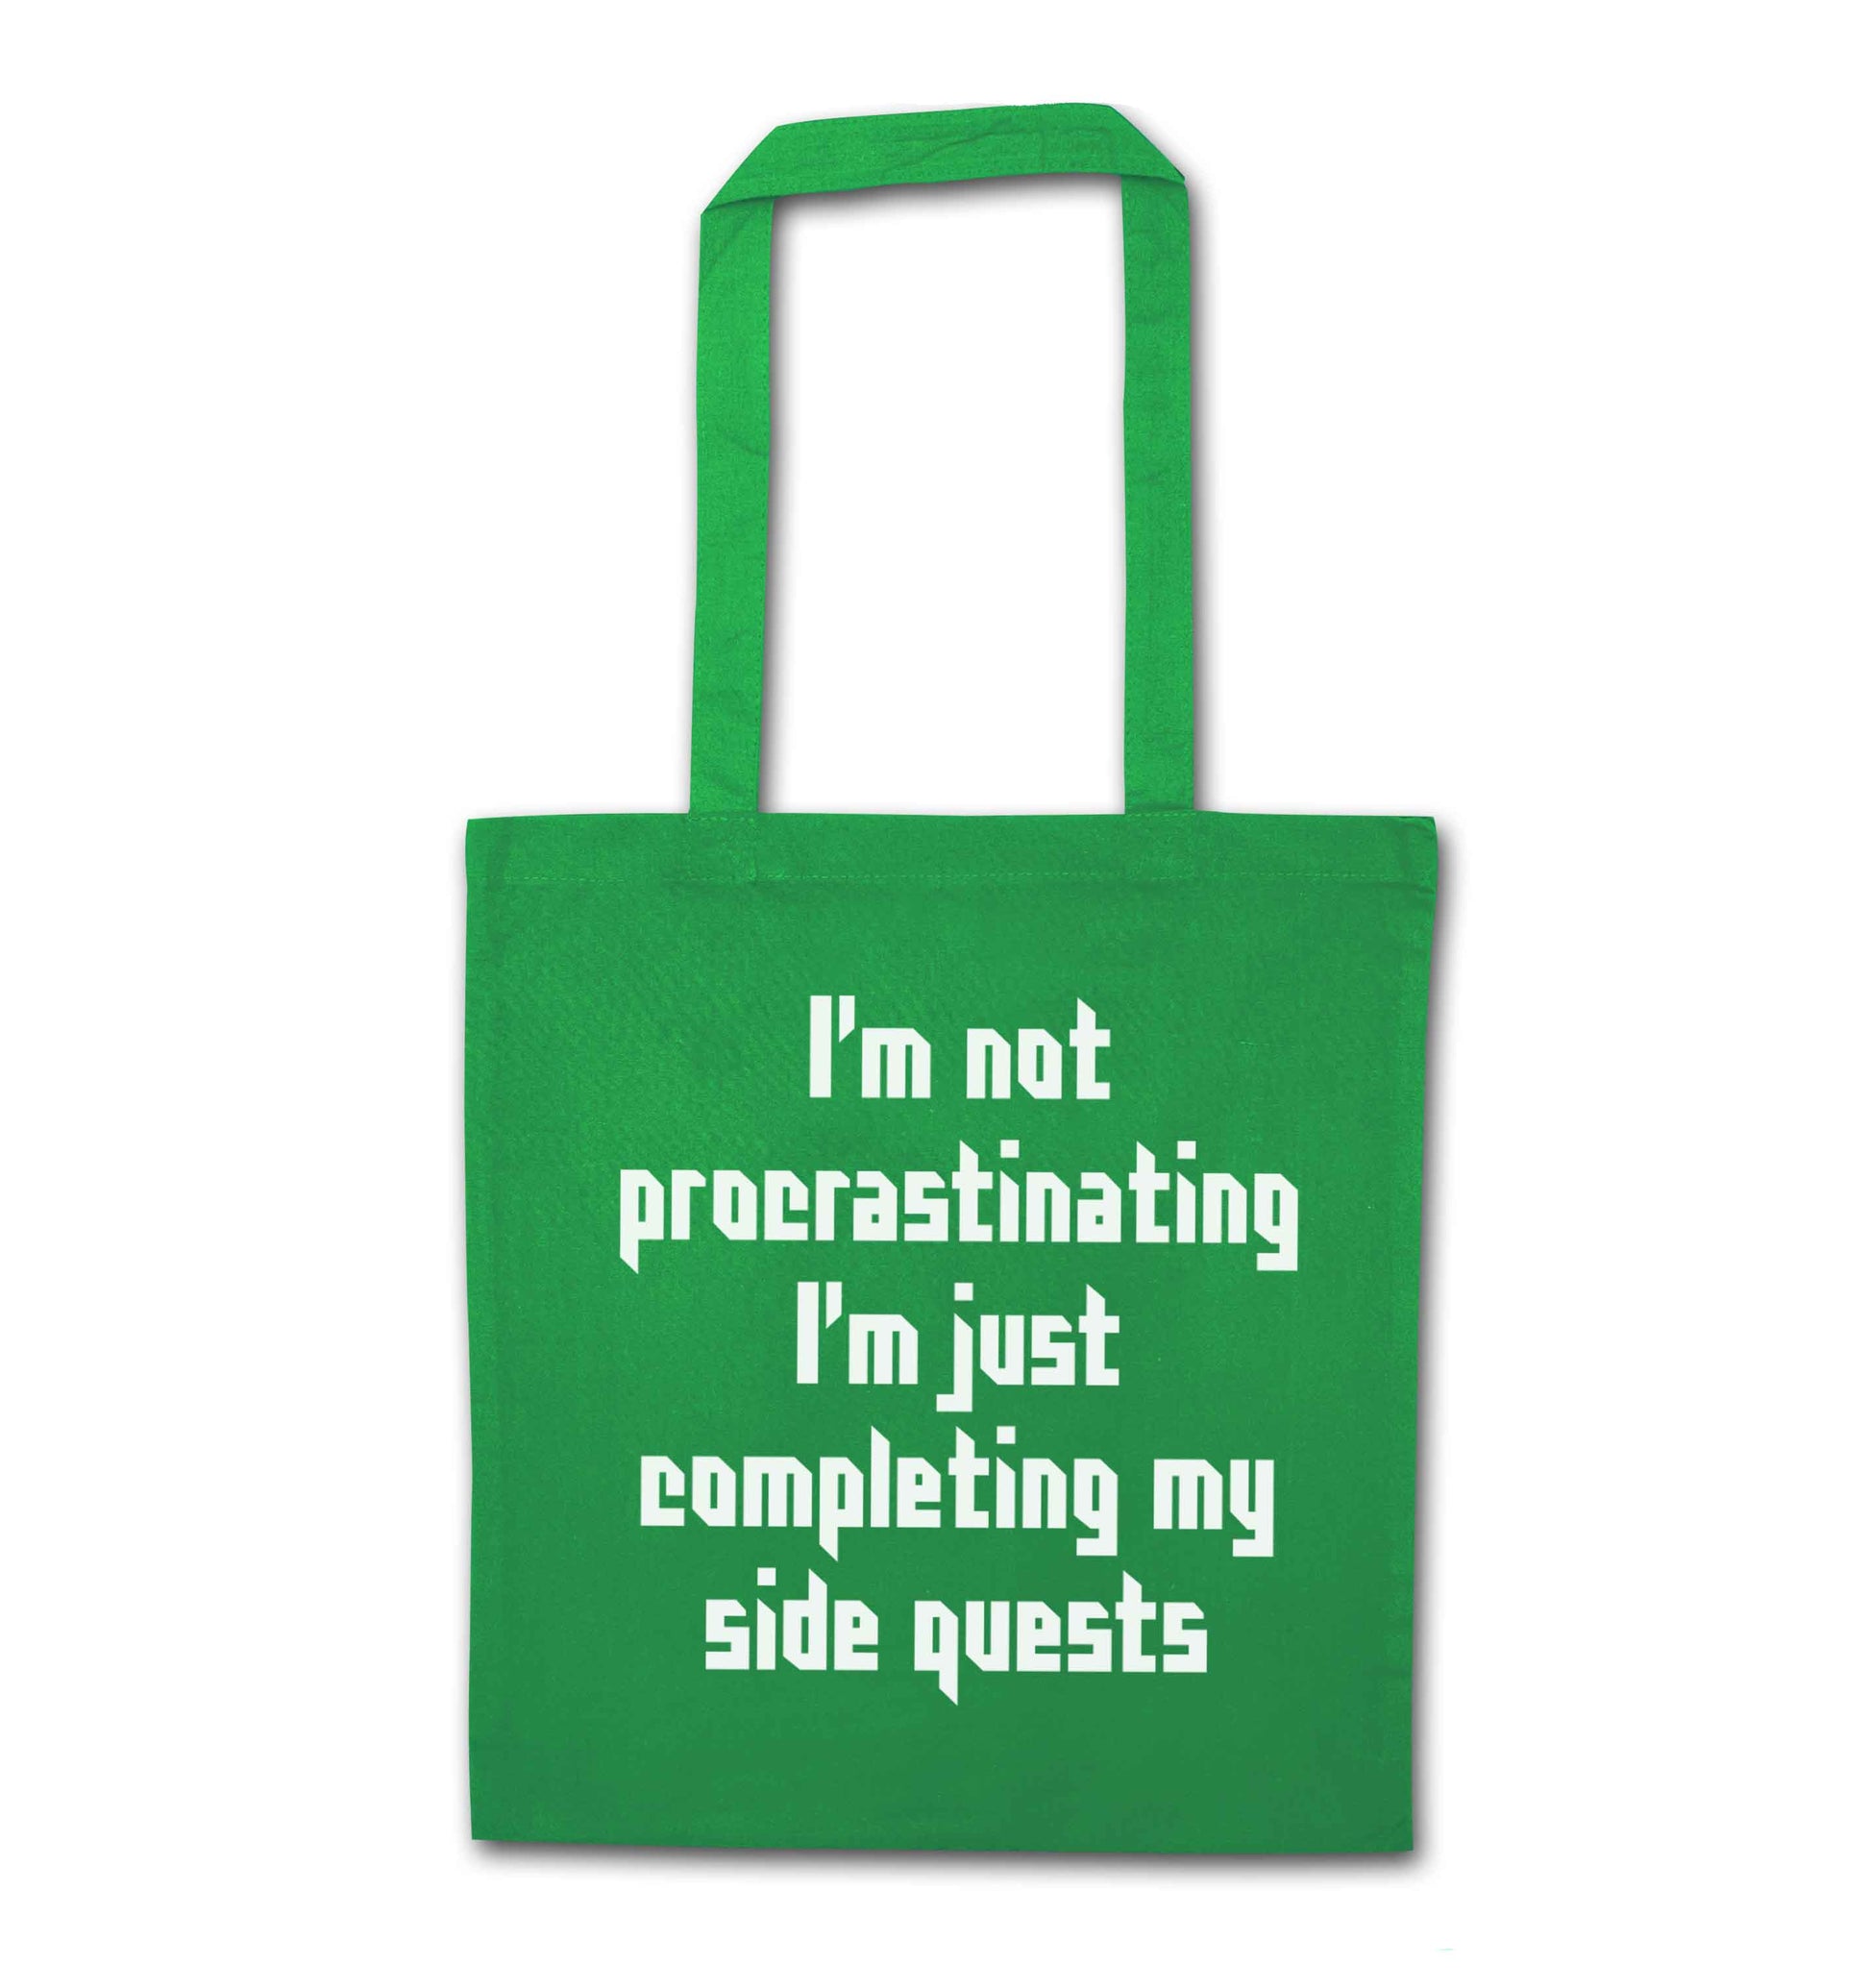 I'm not procrastinating I'm just completing my side quests green tote bag